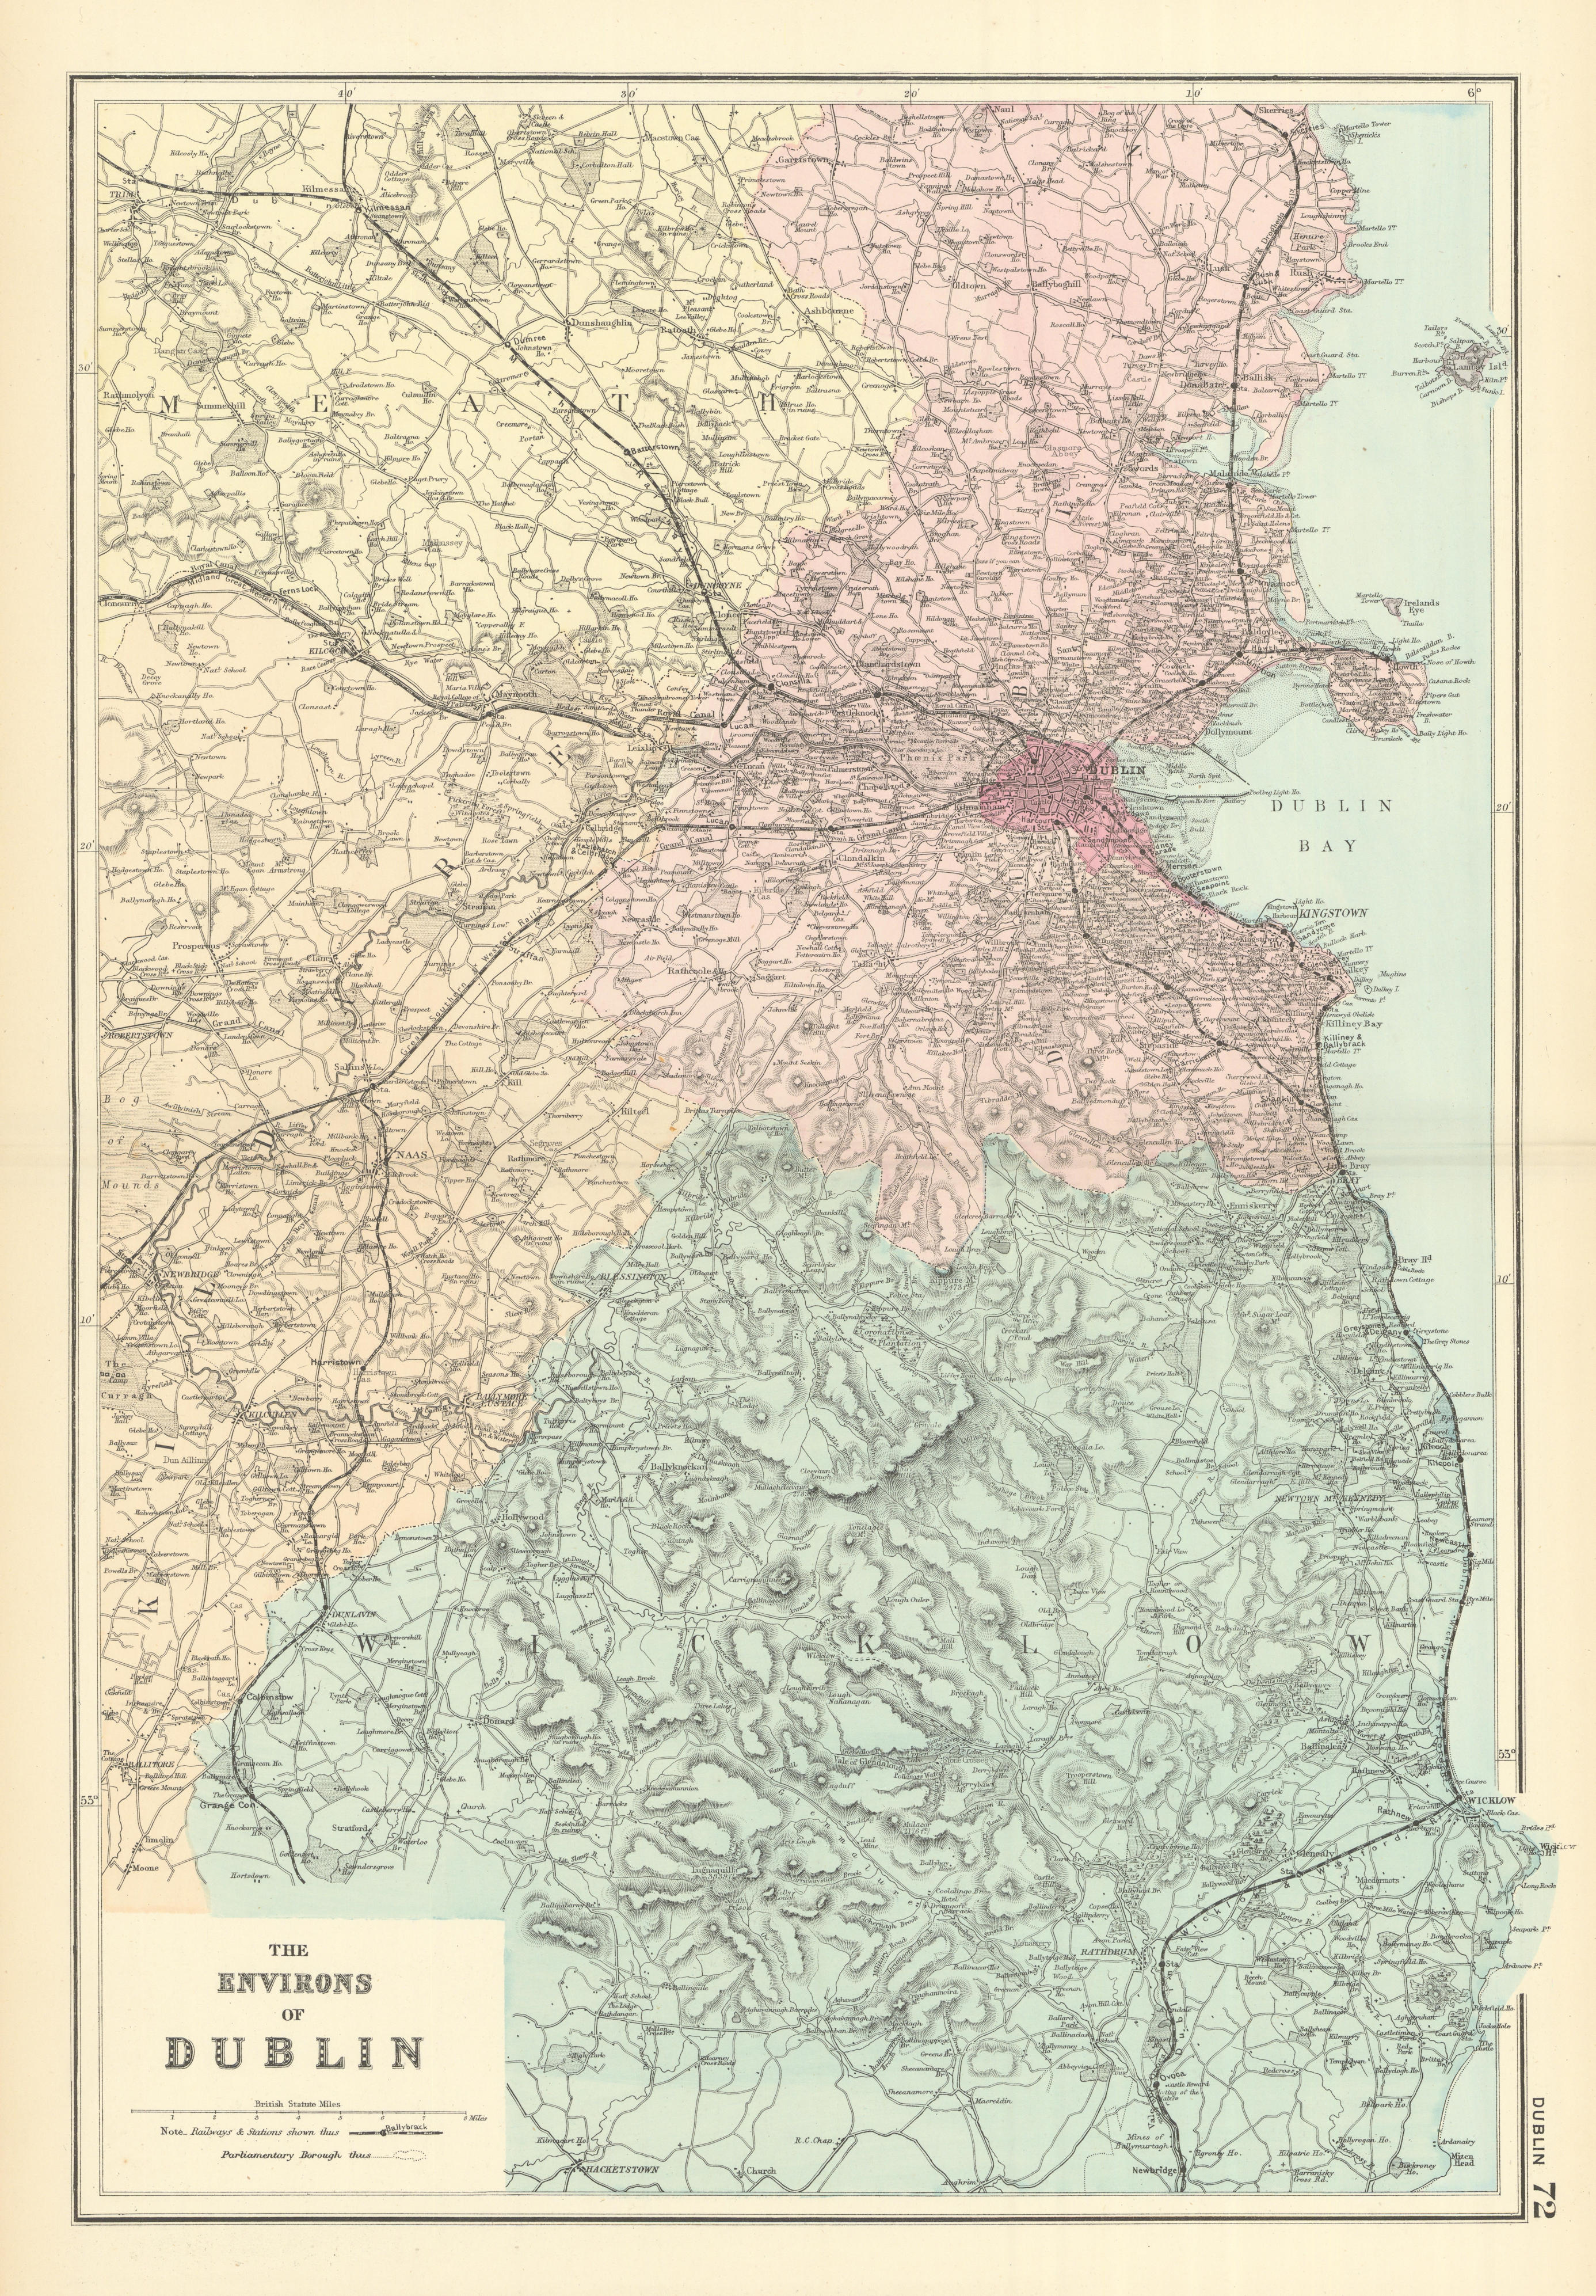 Associate Product DUBLIN & ENVIRONS Meath Kildare Wicklow IRELAND antique map by GW BACON 1891